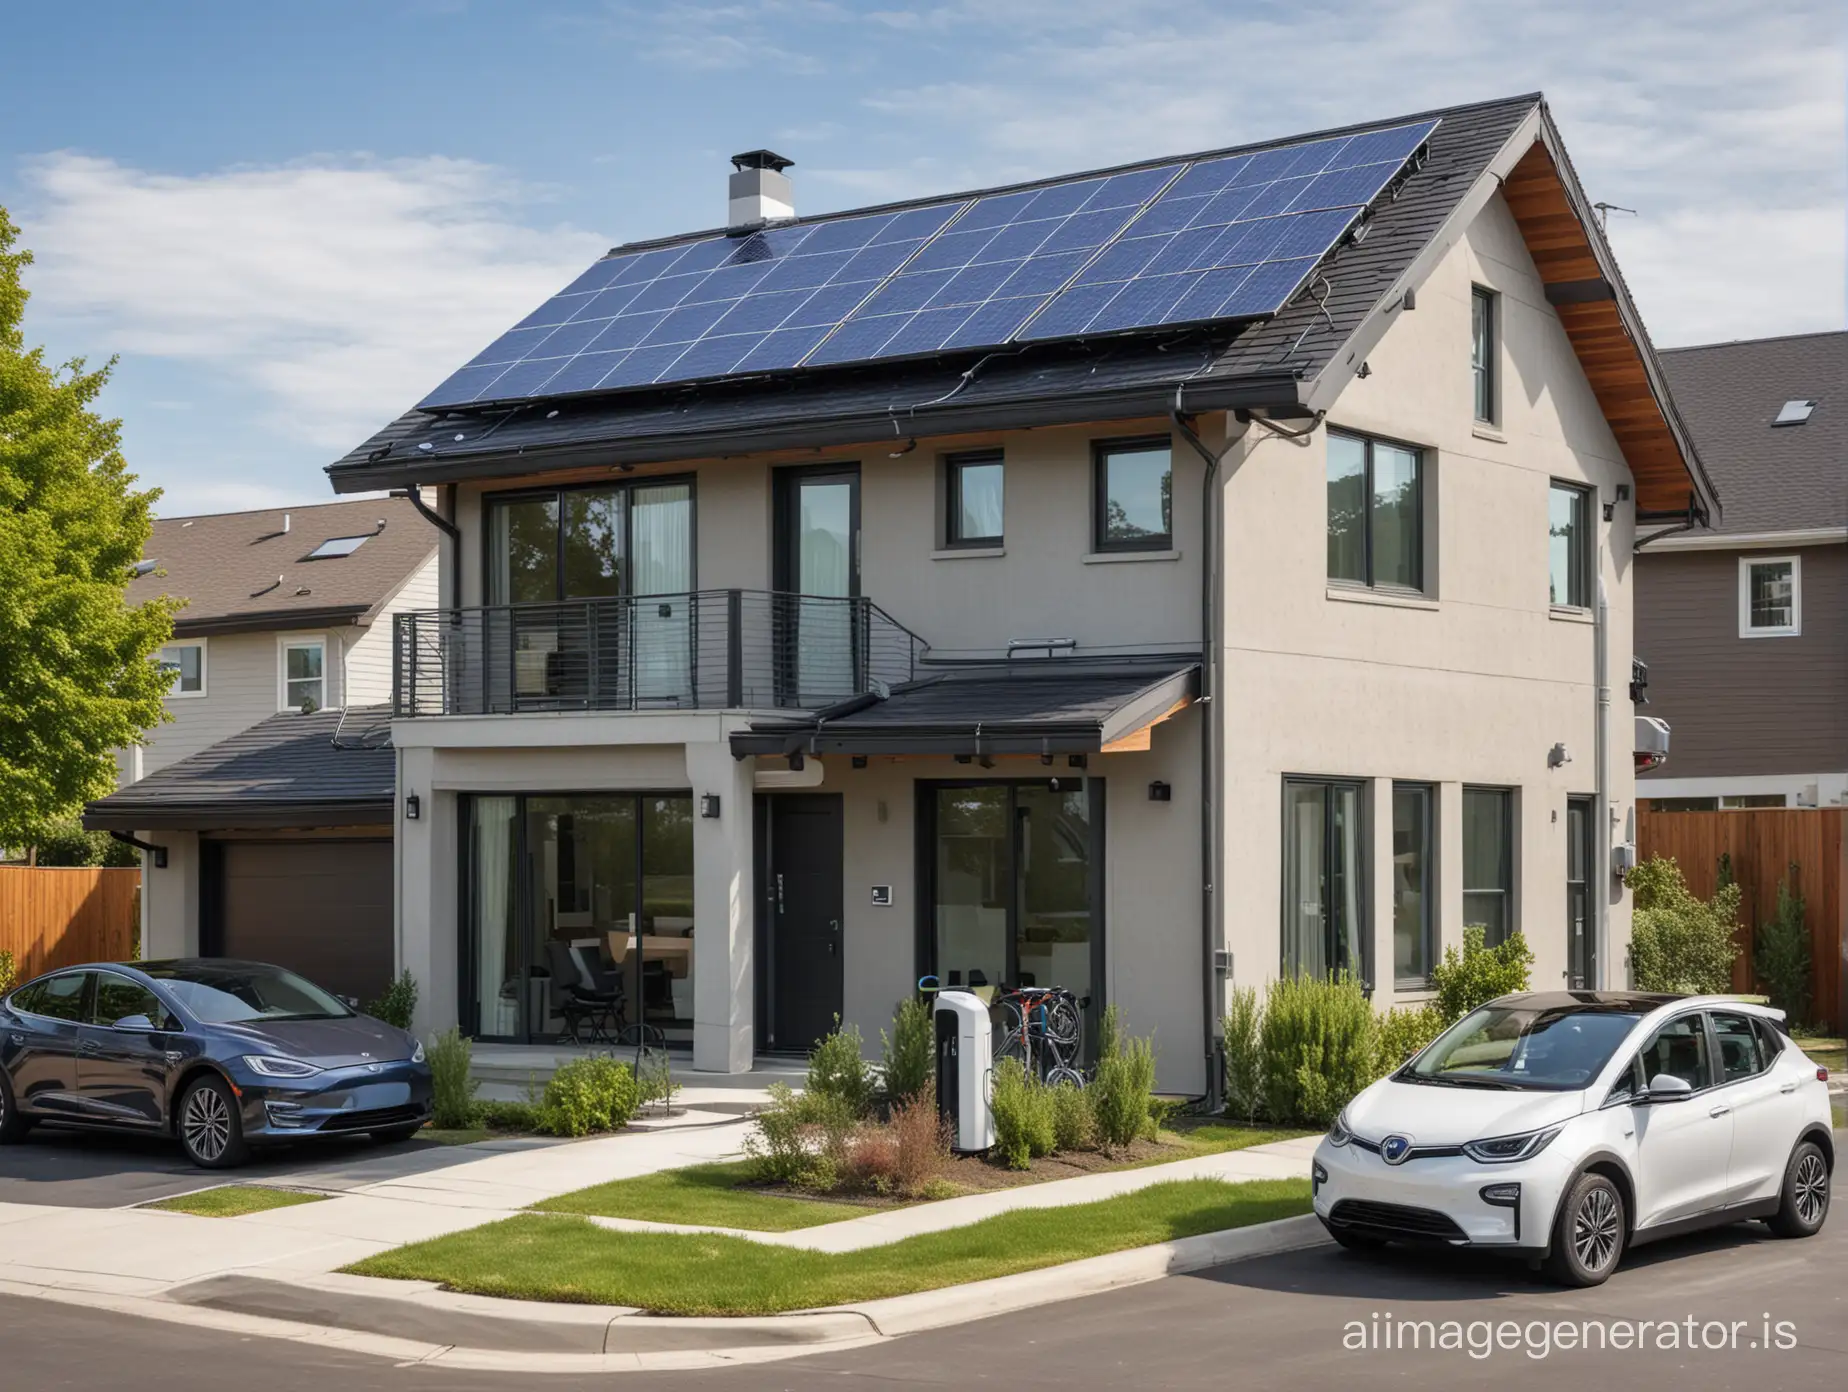 EcoFriendly-TwoStory-Home-with-Solar-Panels-and-Charging-Electric-Car